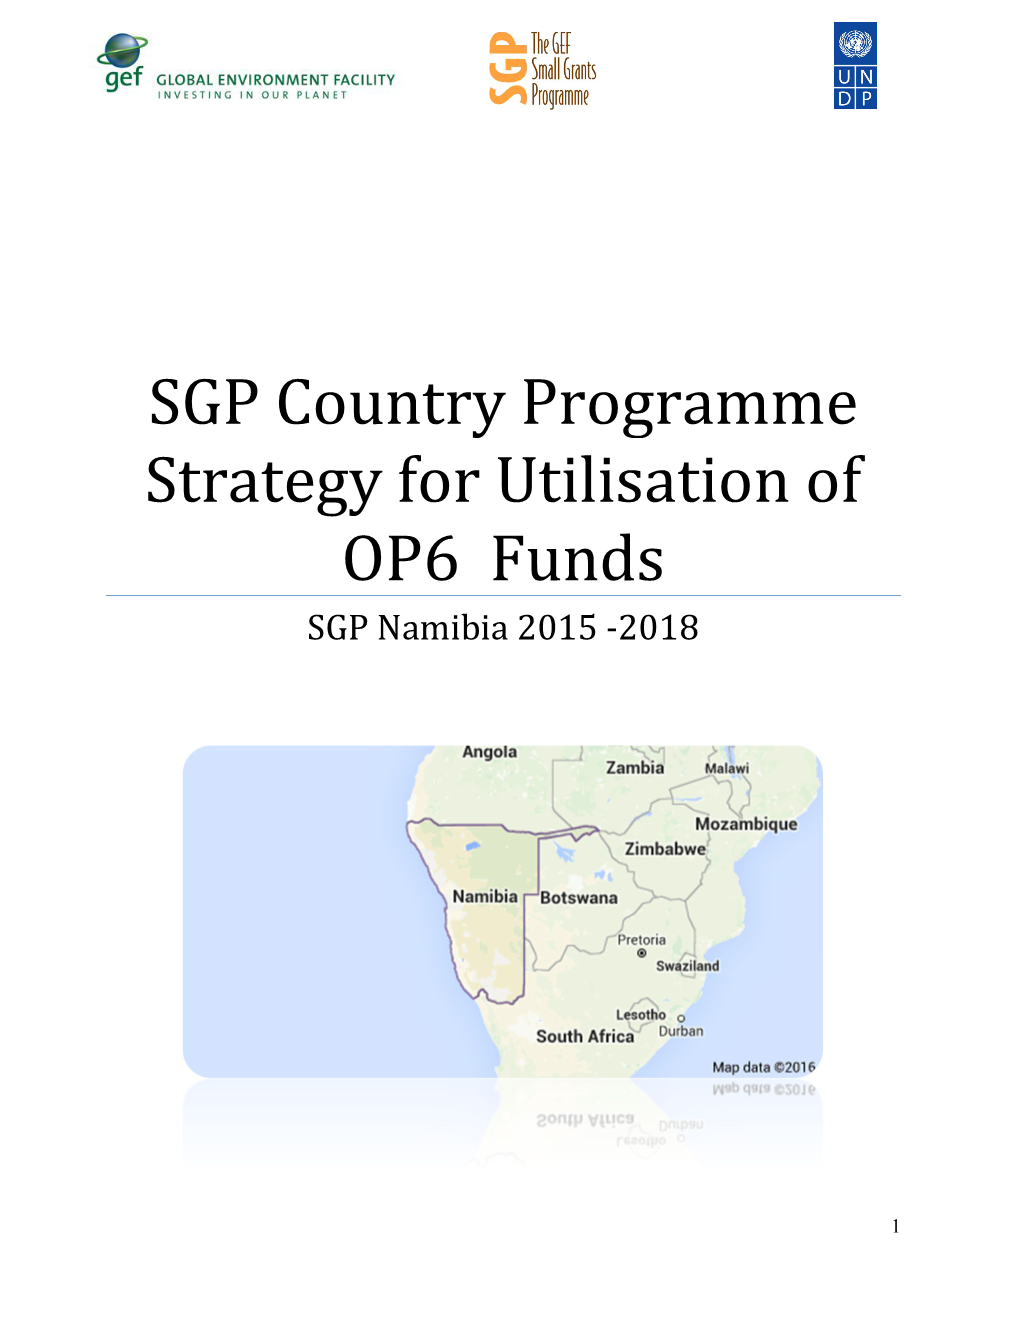 SGP Country Programme Strategy for Utilisation of OP6 Funds